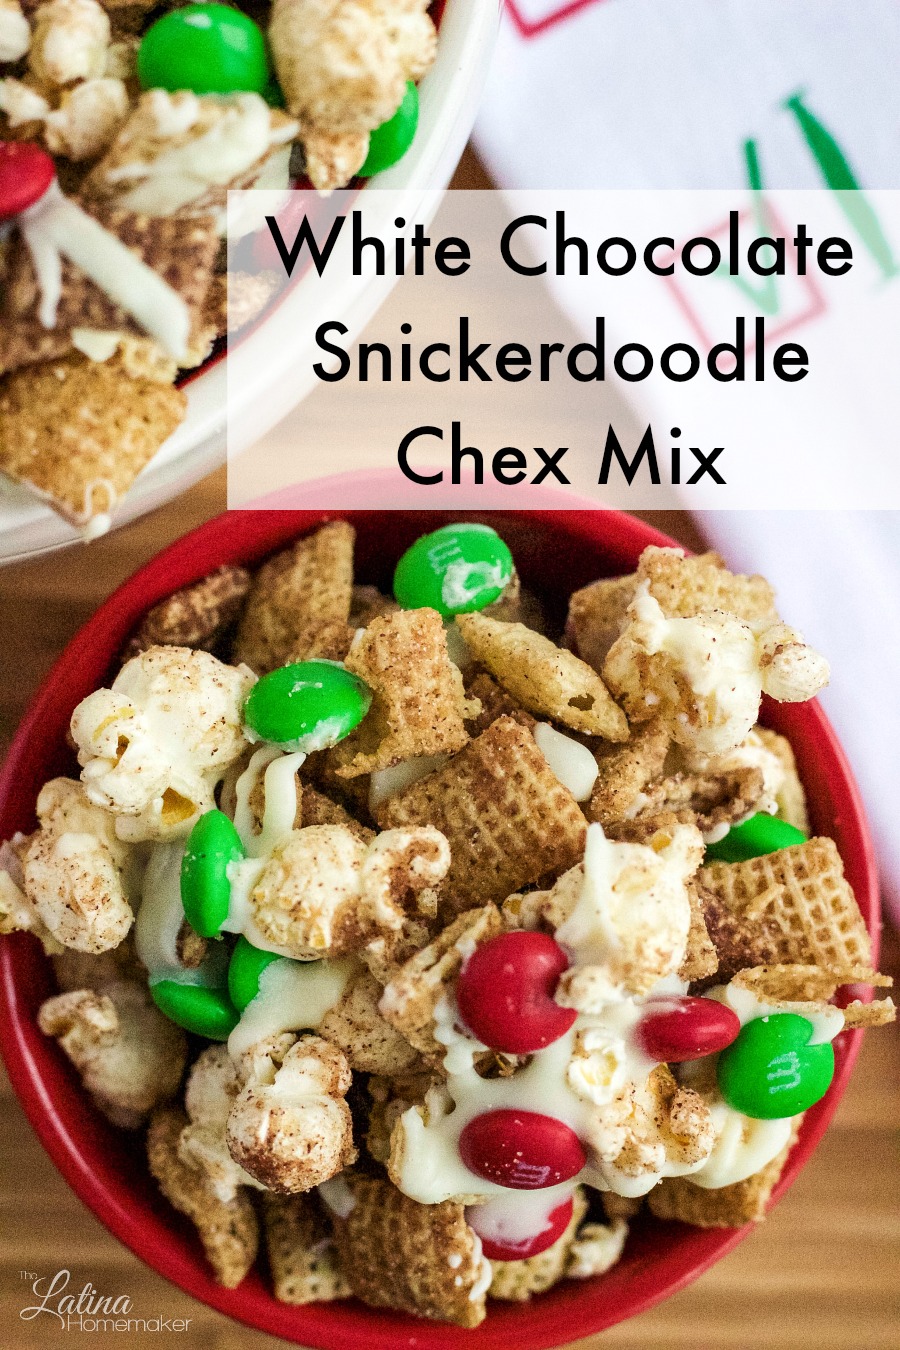 White Chocolate Snickerdoodle Chex Mix – An easy and delicious Chex Mix recipe that combines cinnamon and white chocolate for the ultimate treat!